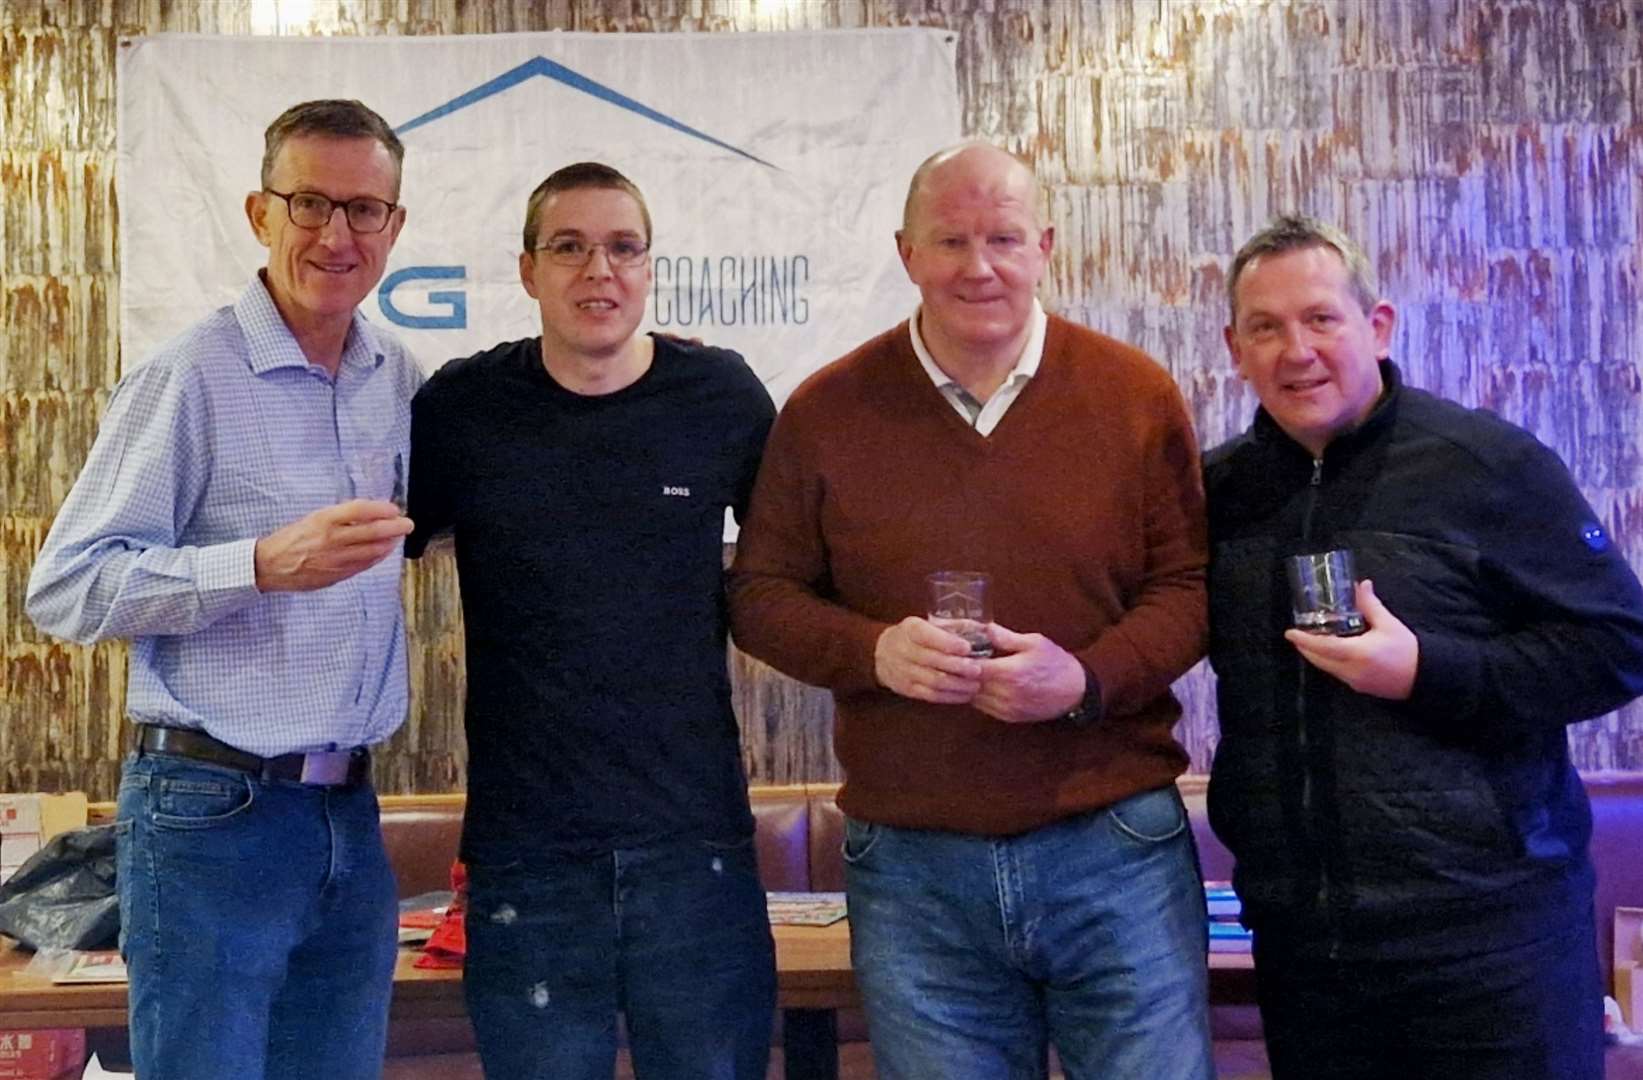 Alyn Gunn of AG Coaching (second from left) with Brian Irvine, Duncan Shearer and Billy Dodds.